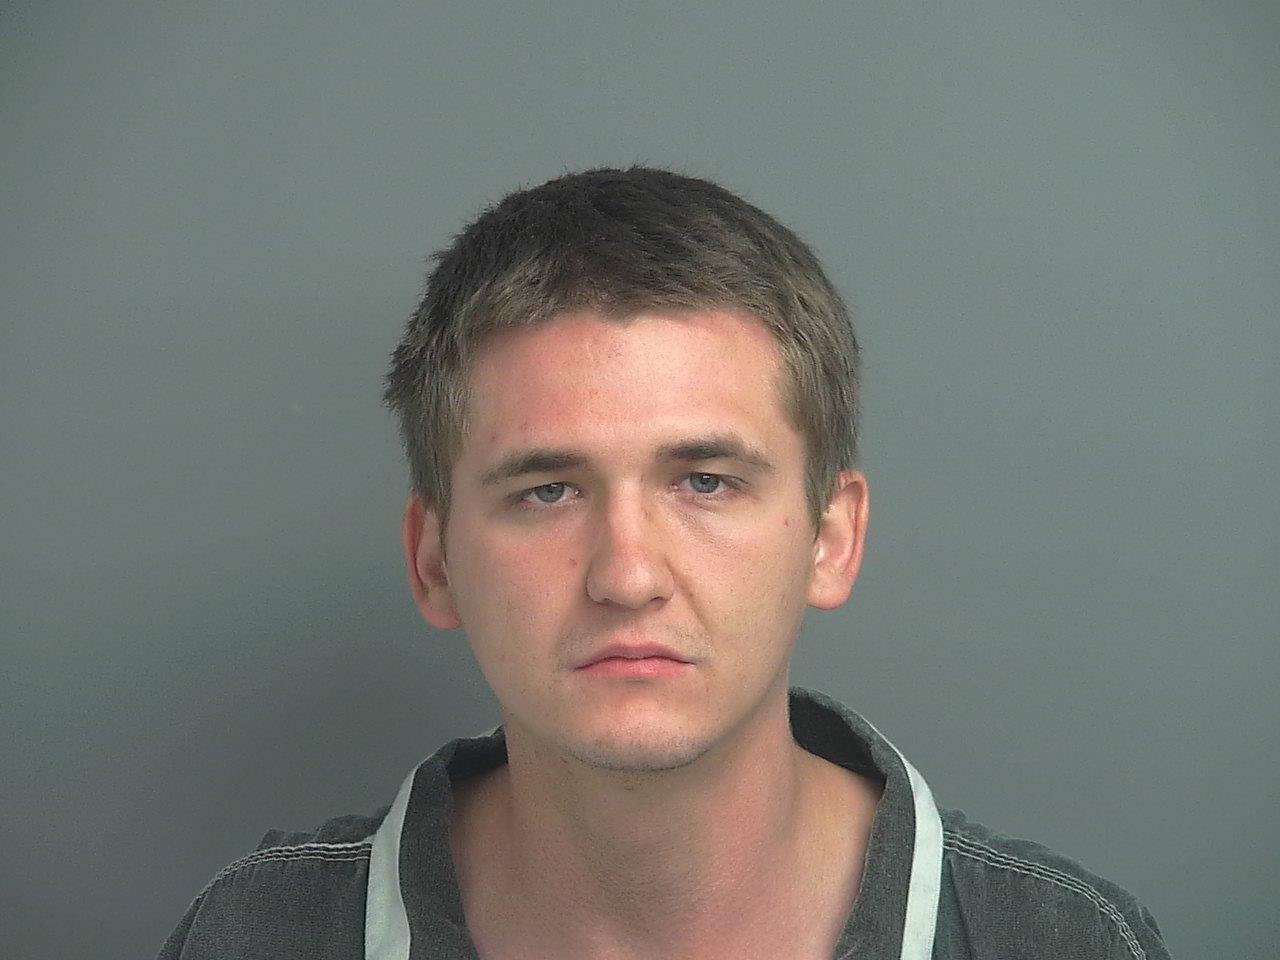 MONTGOMERY COUNTY JAIL BOOKINGS FOR 6/19/19